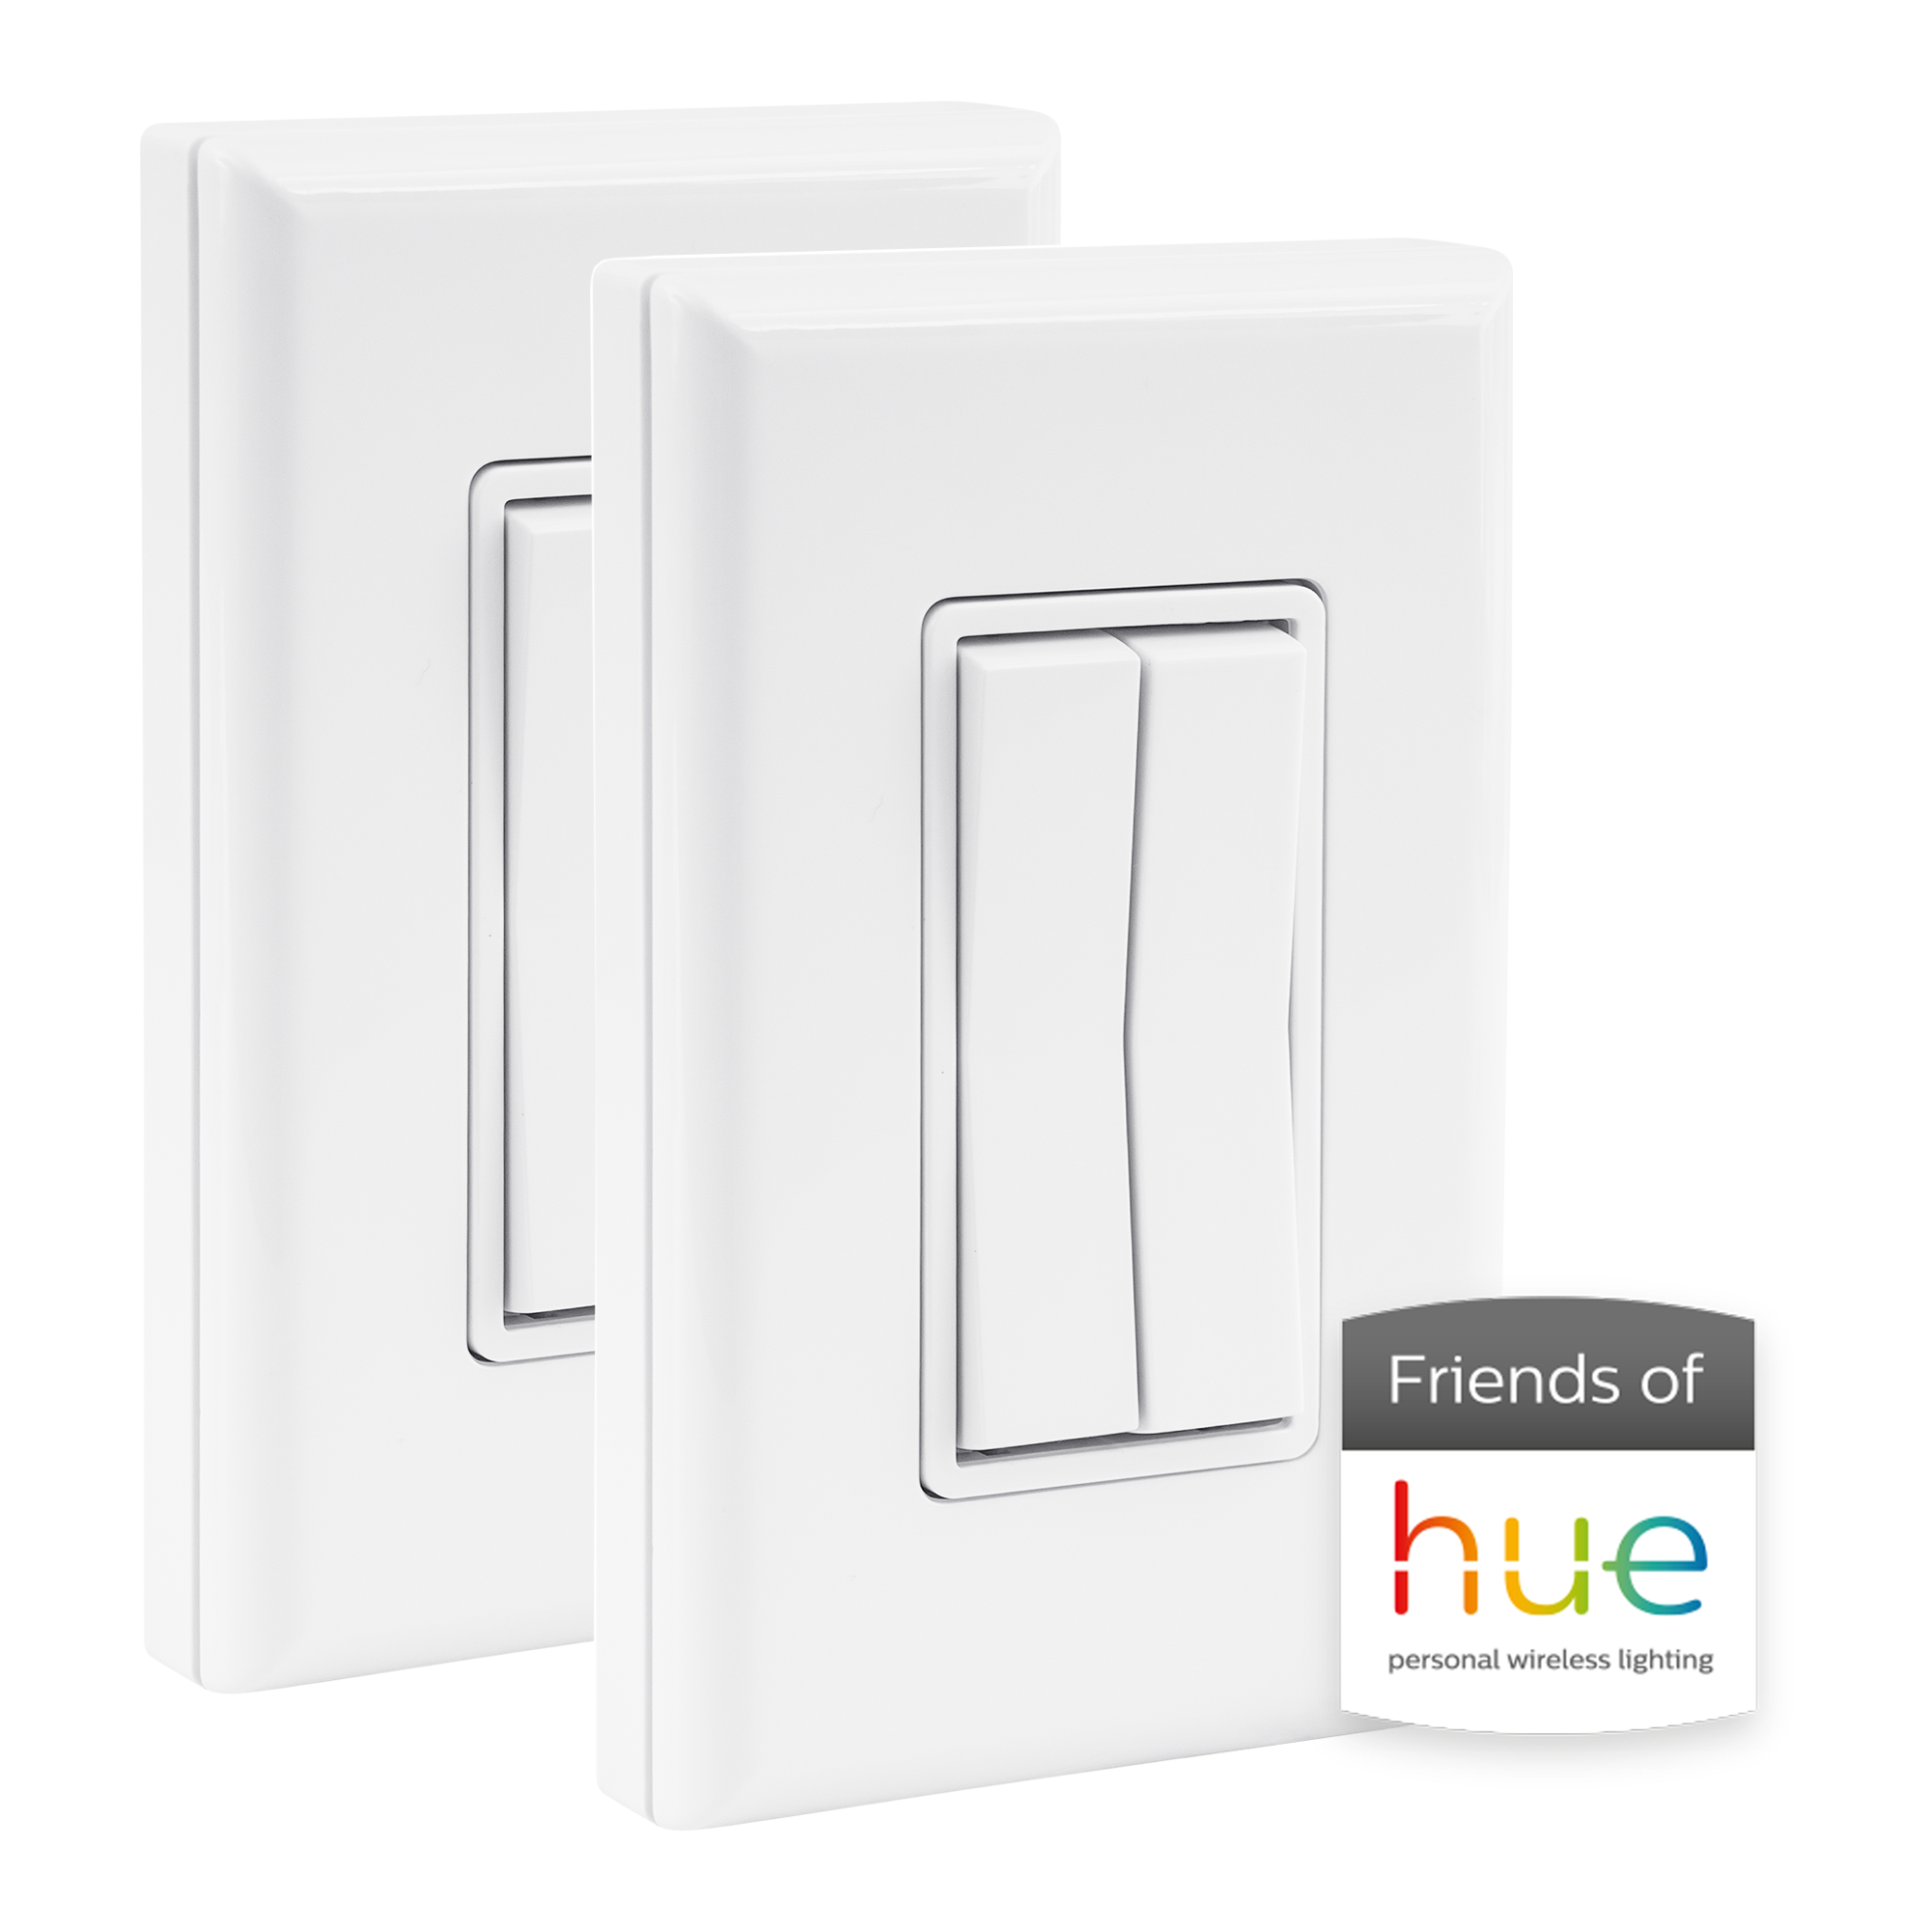 Philips Hue Wall Tap Dial Light Switch, Installation-Free, Smart Home,  Exclusively for Philips Hue Smart Lights, White, 1-Pack & Hue Bridge Smart  Lighting Hub - White 